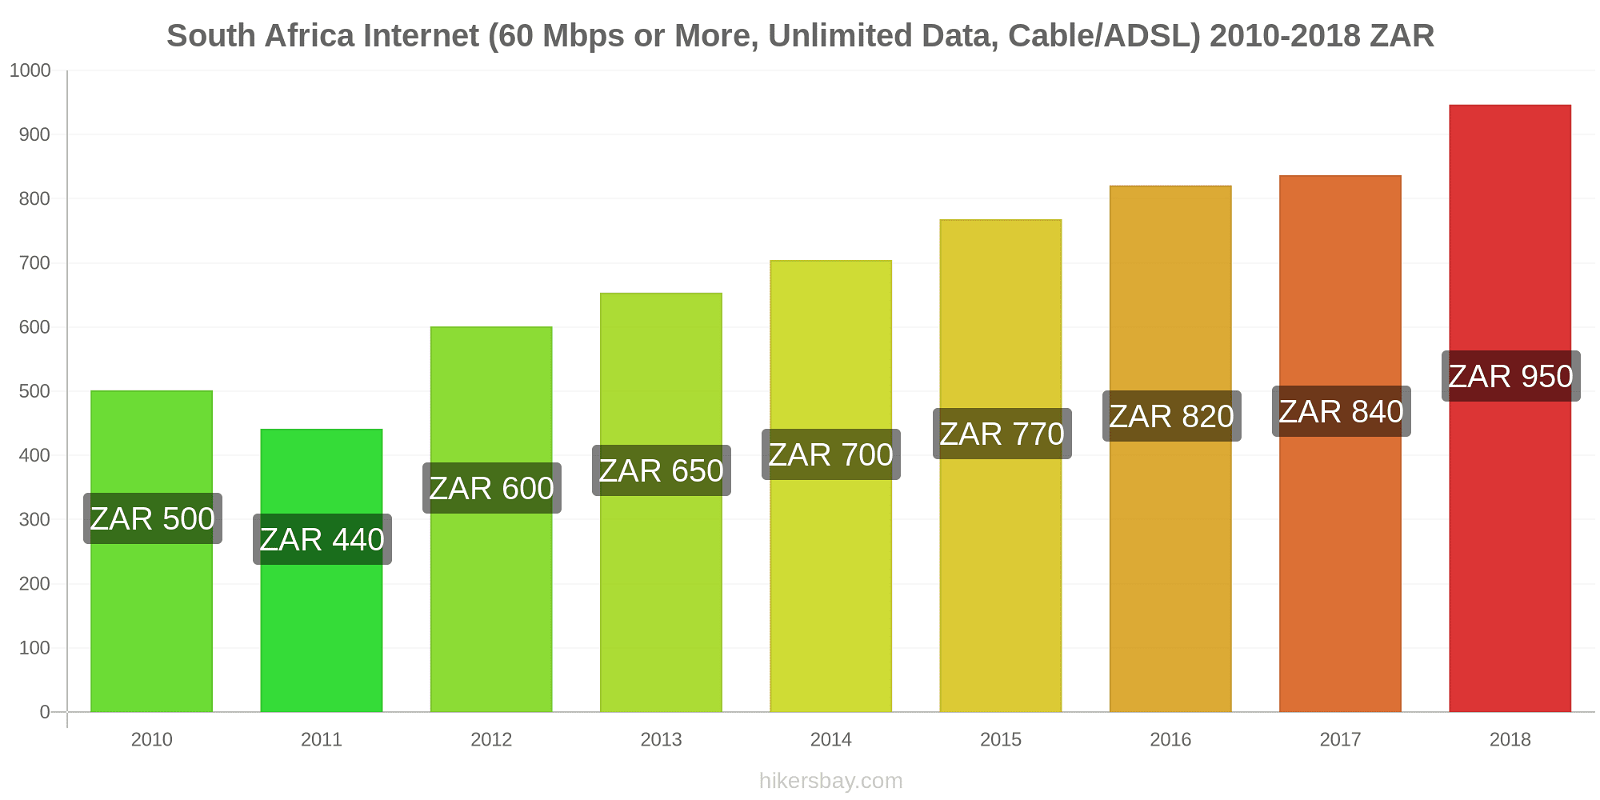 South Africa price changes Internet (60 Mbps or more, unlimited data, cable/ADSL) hikersbay.com